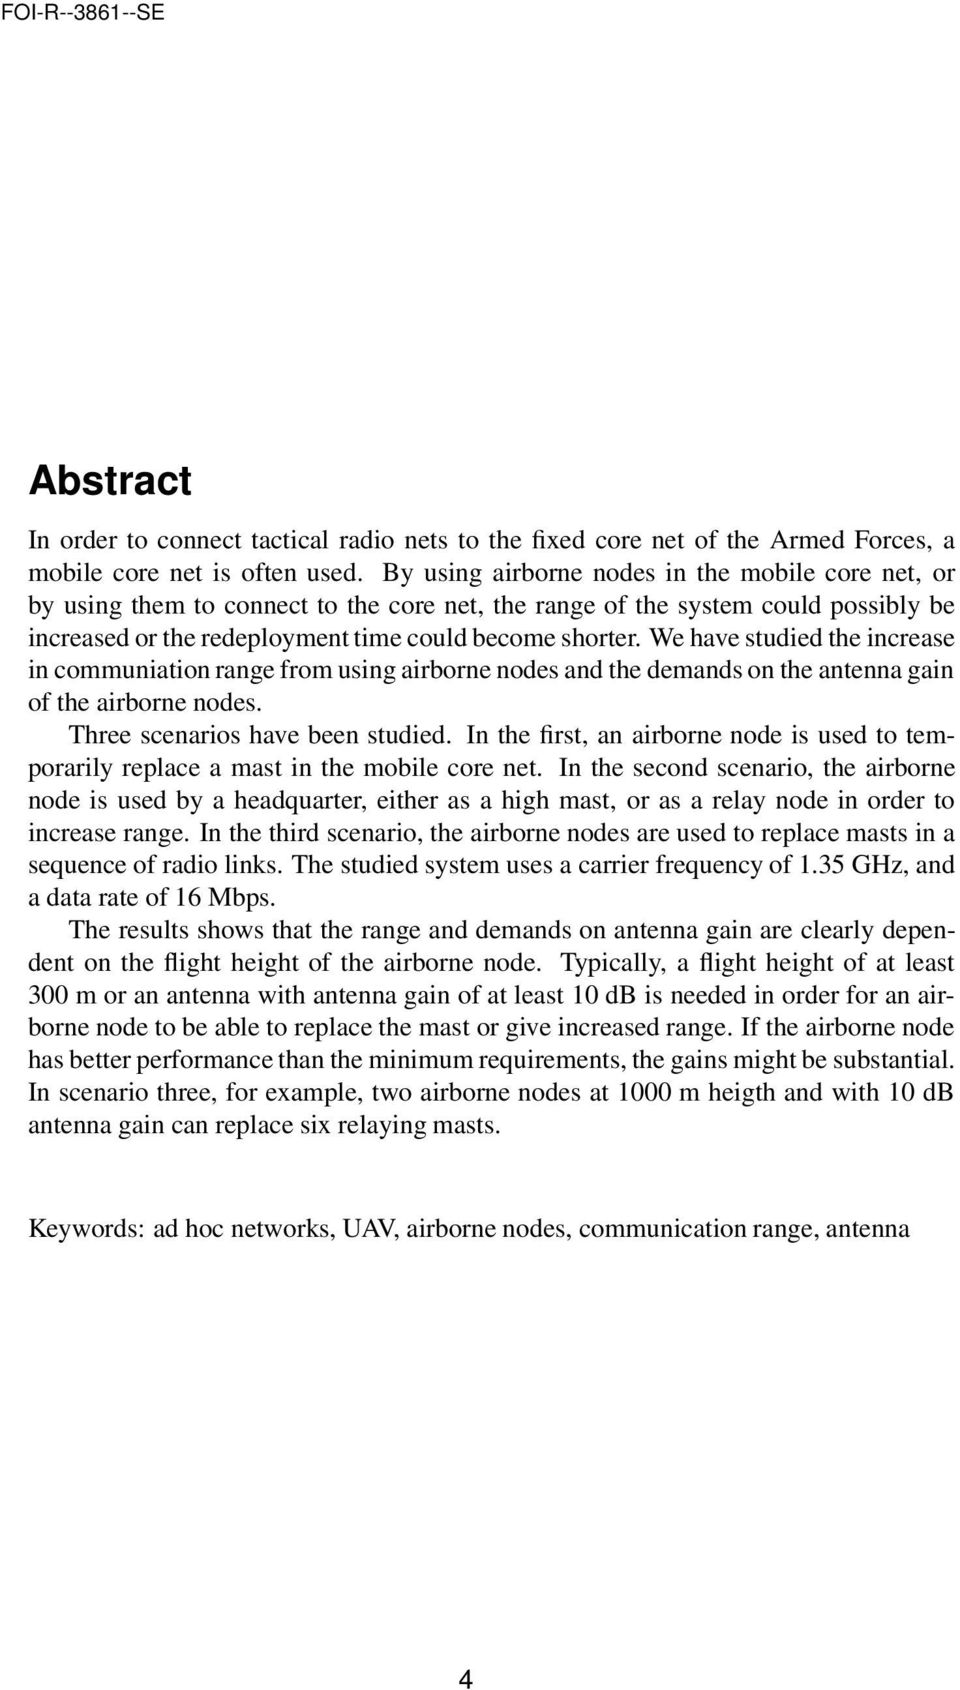 We have studied the increase in communiation range from using airborne nodes and the demands on the antenna gain of the airborne nodes. Three scenarios have been studied.